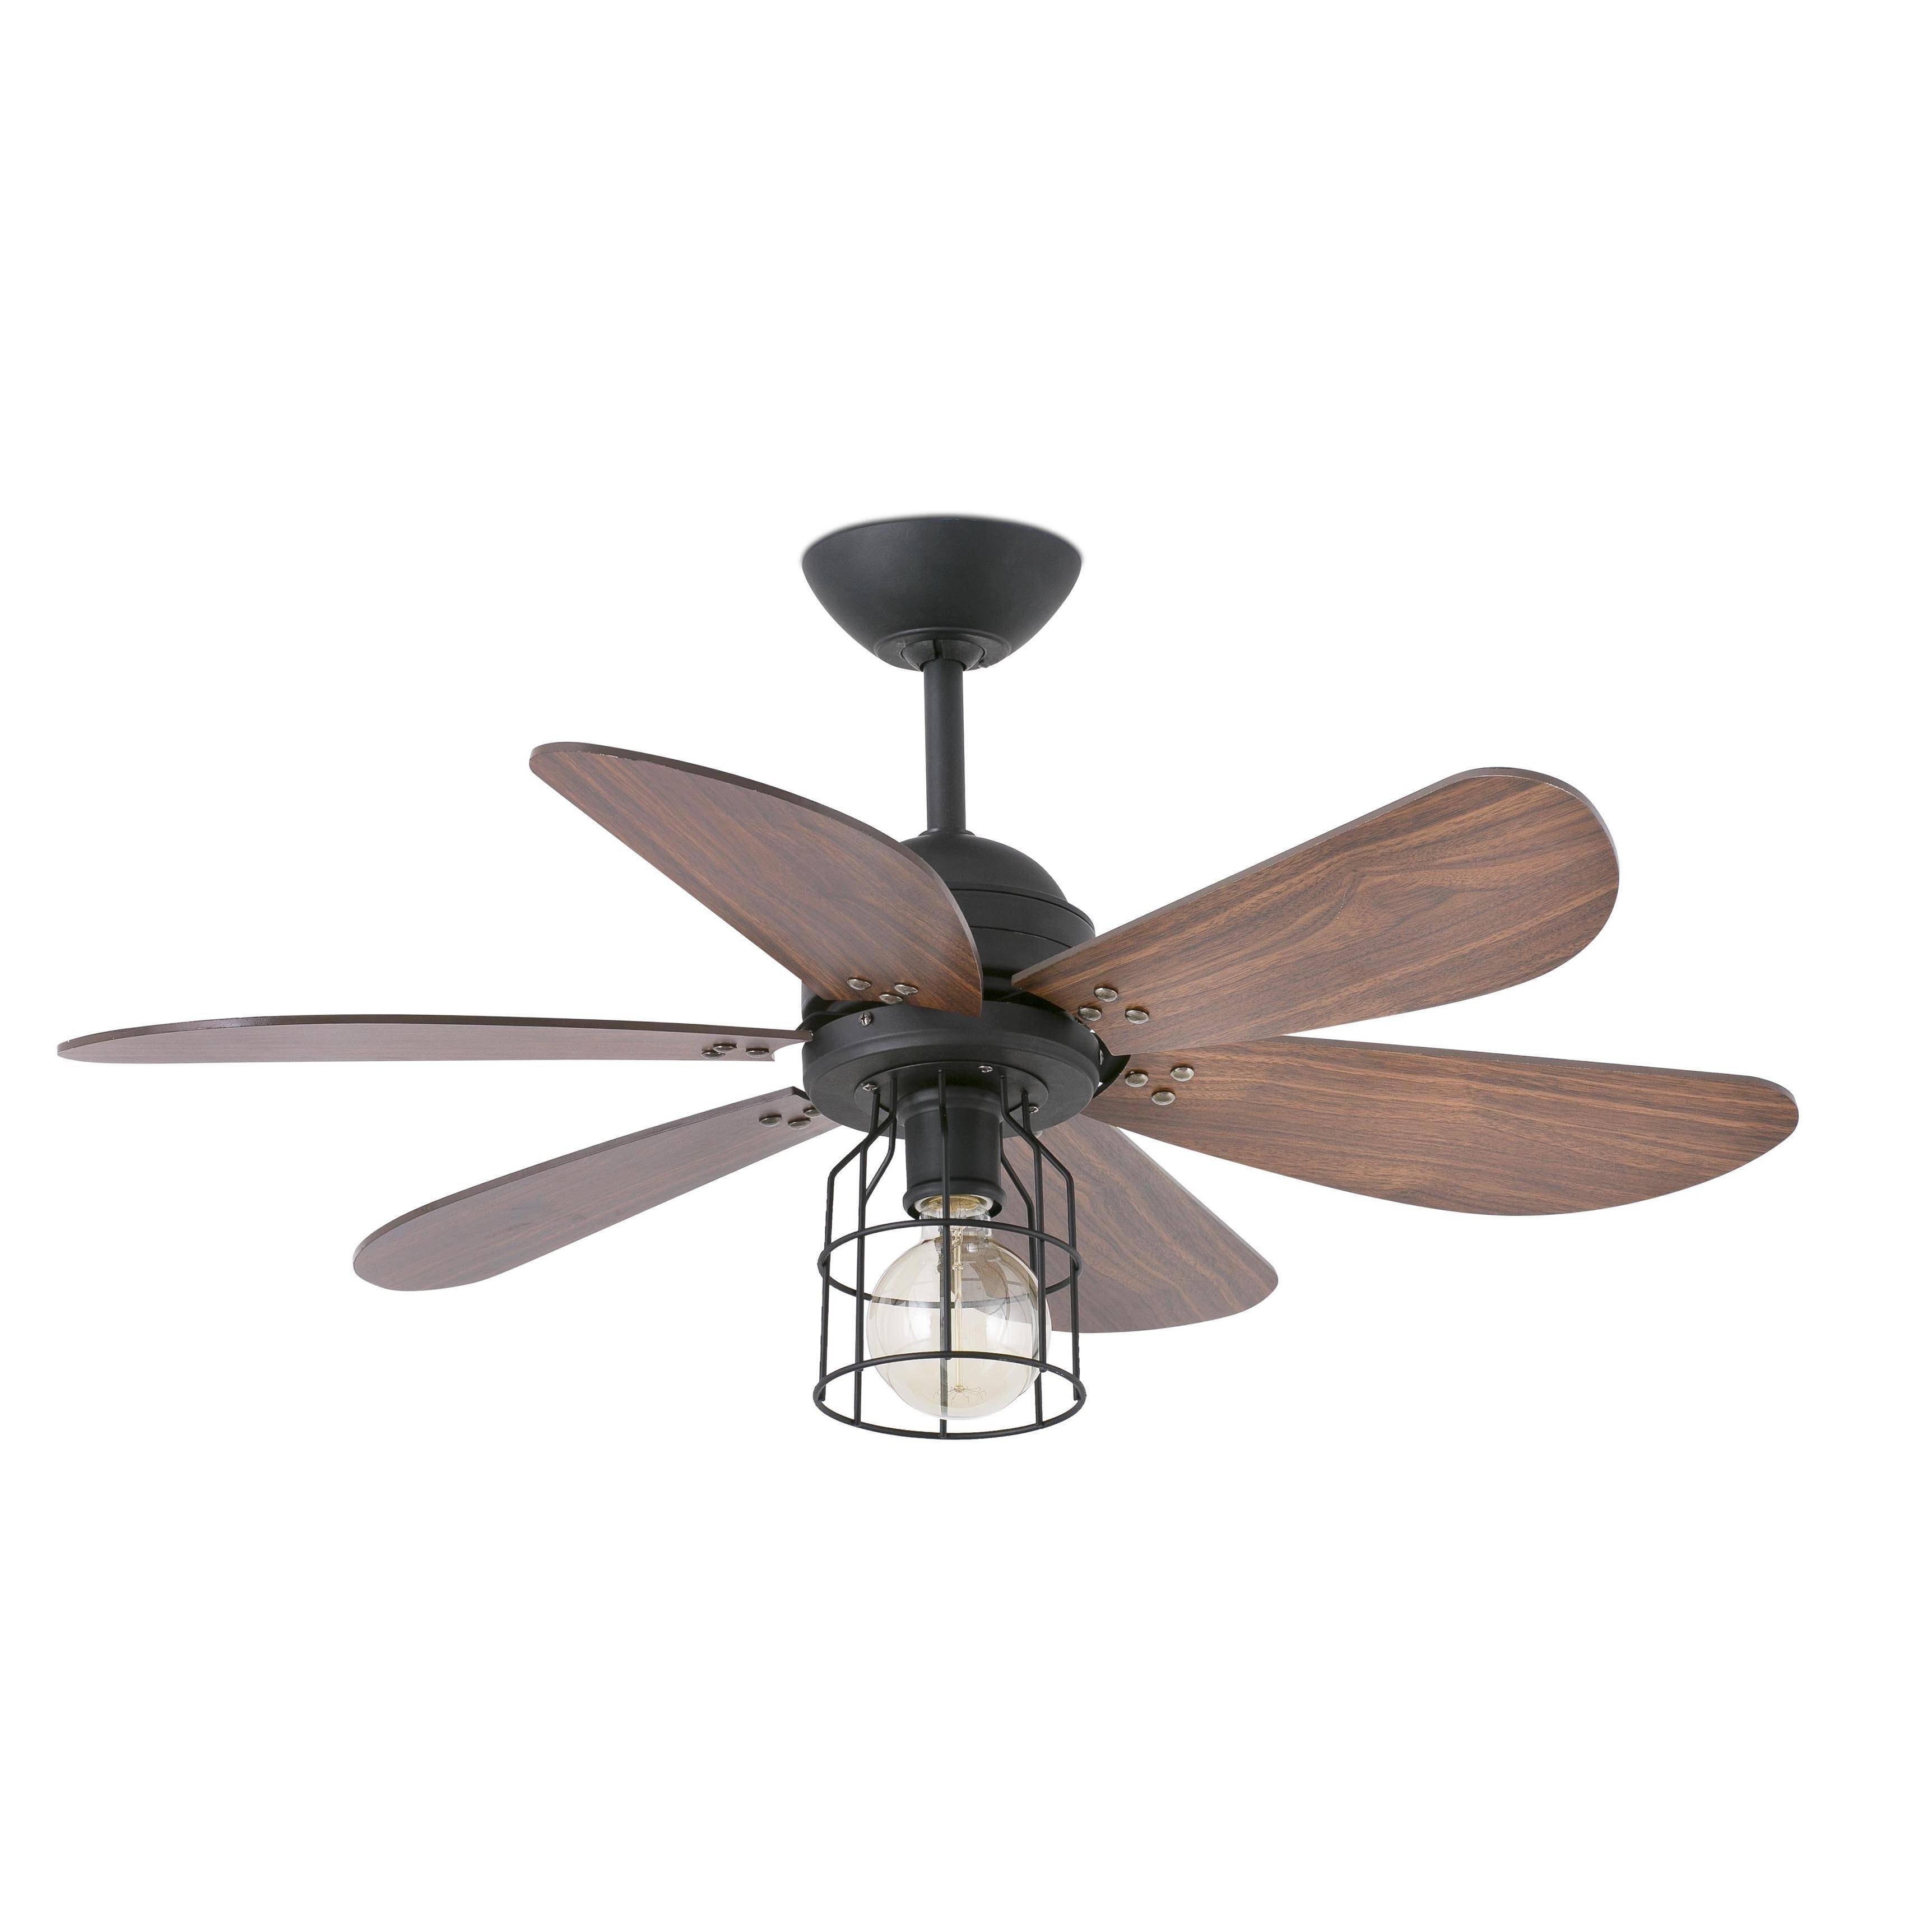 Chicago 1 Light Small Ceiling Fan Black Walnut with Light E27 - image 1